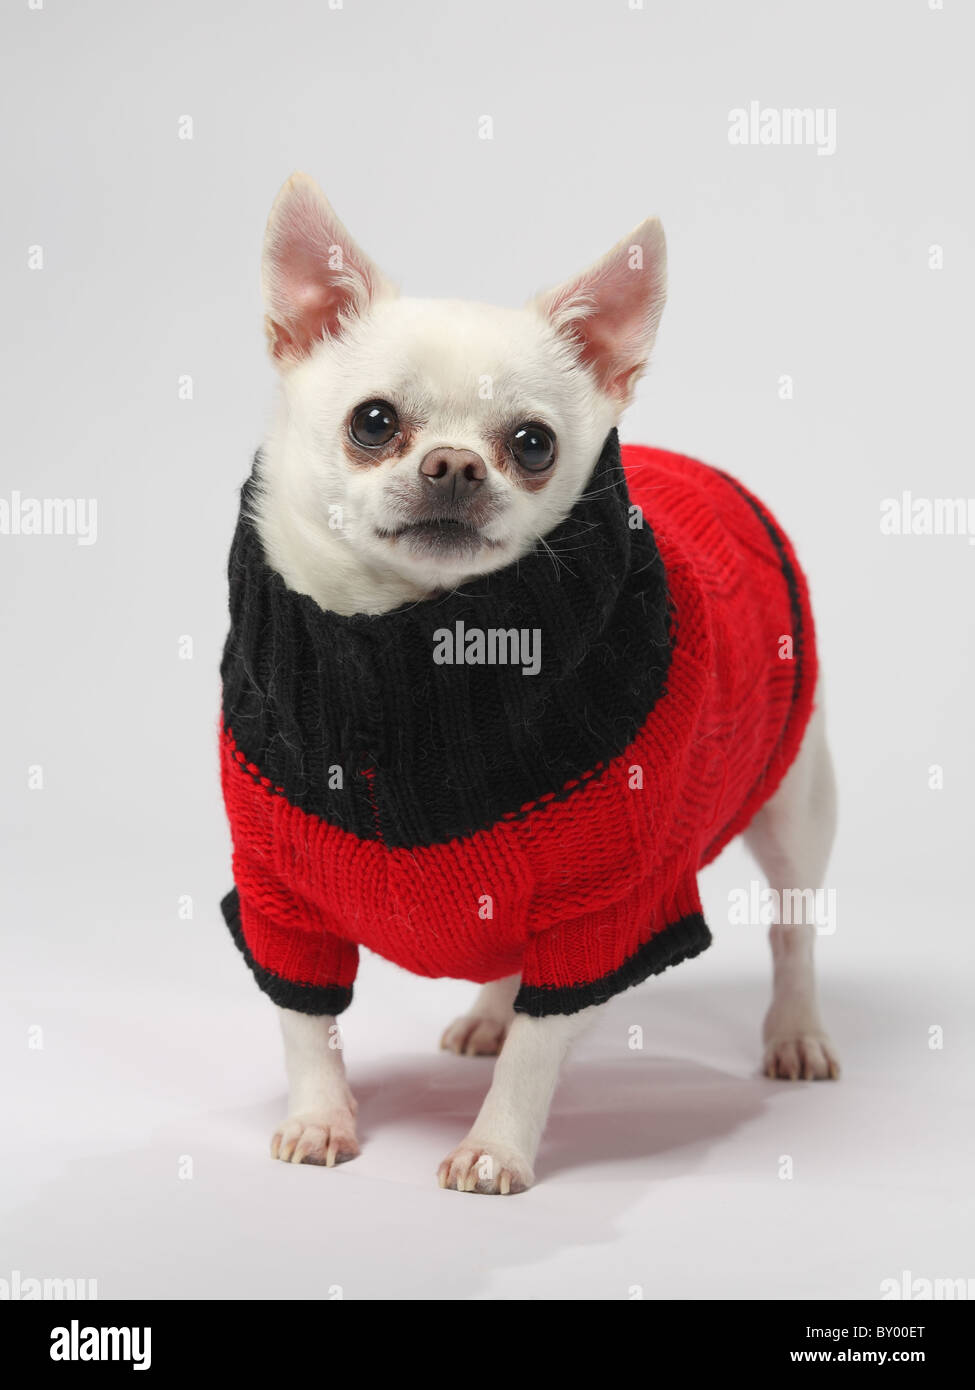 cute little chihuahua dog wearing sweater standing on white background Stock Photo